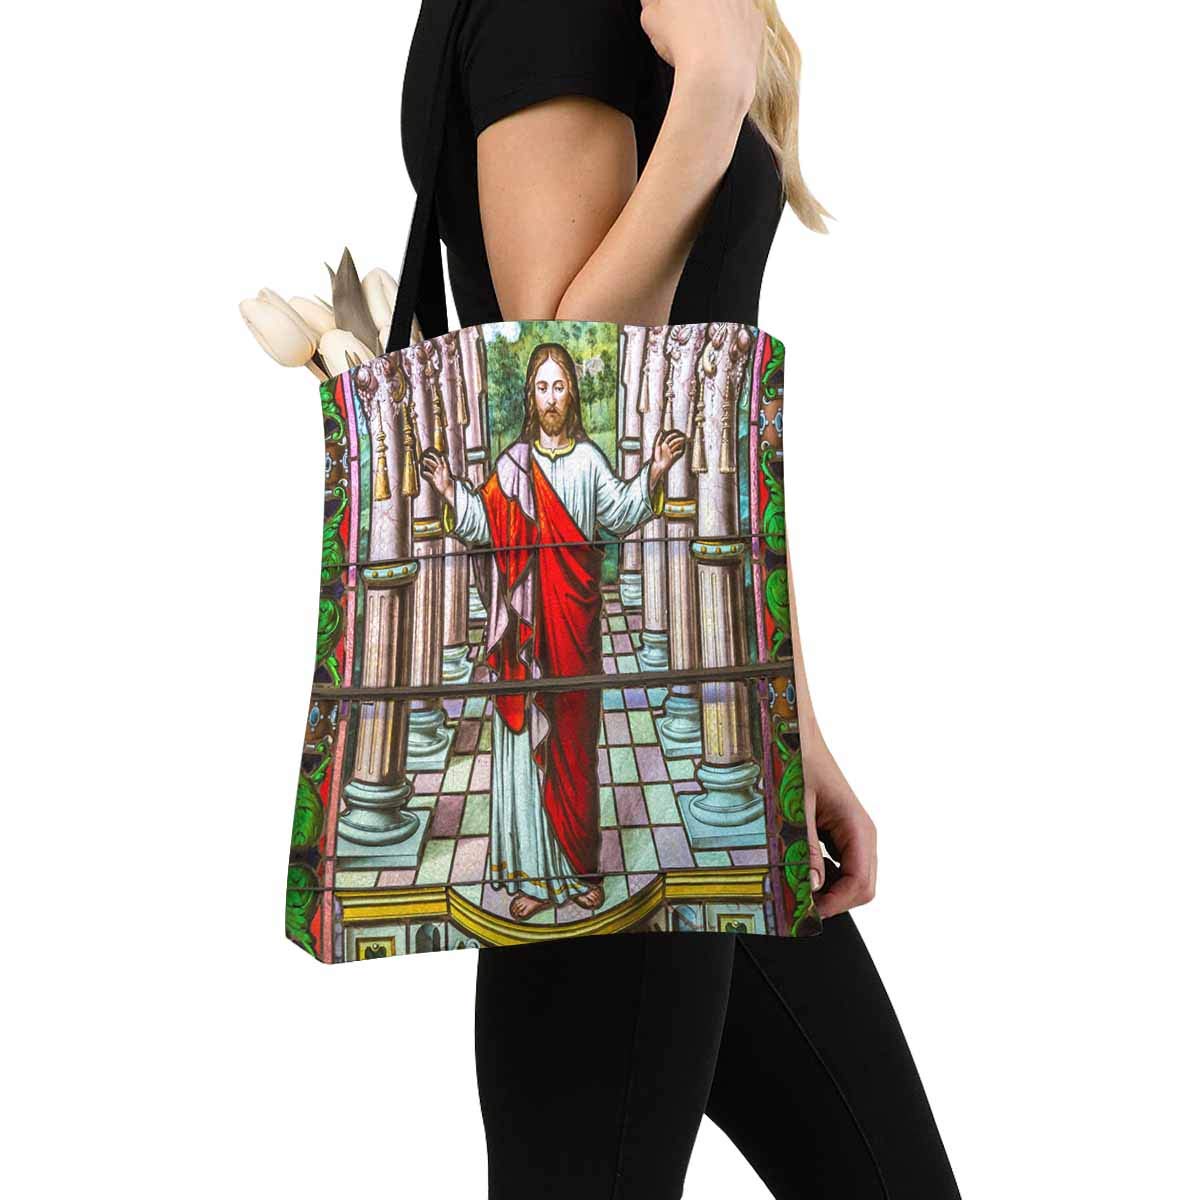 ASHLEIGH Stained Glass Religious Background Canvas Tote Bag Tote Shopping Bag Washable Grocery Tote Bag, Craft Canvas Bag for Women Men Kids - image 3 of 3